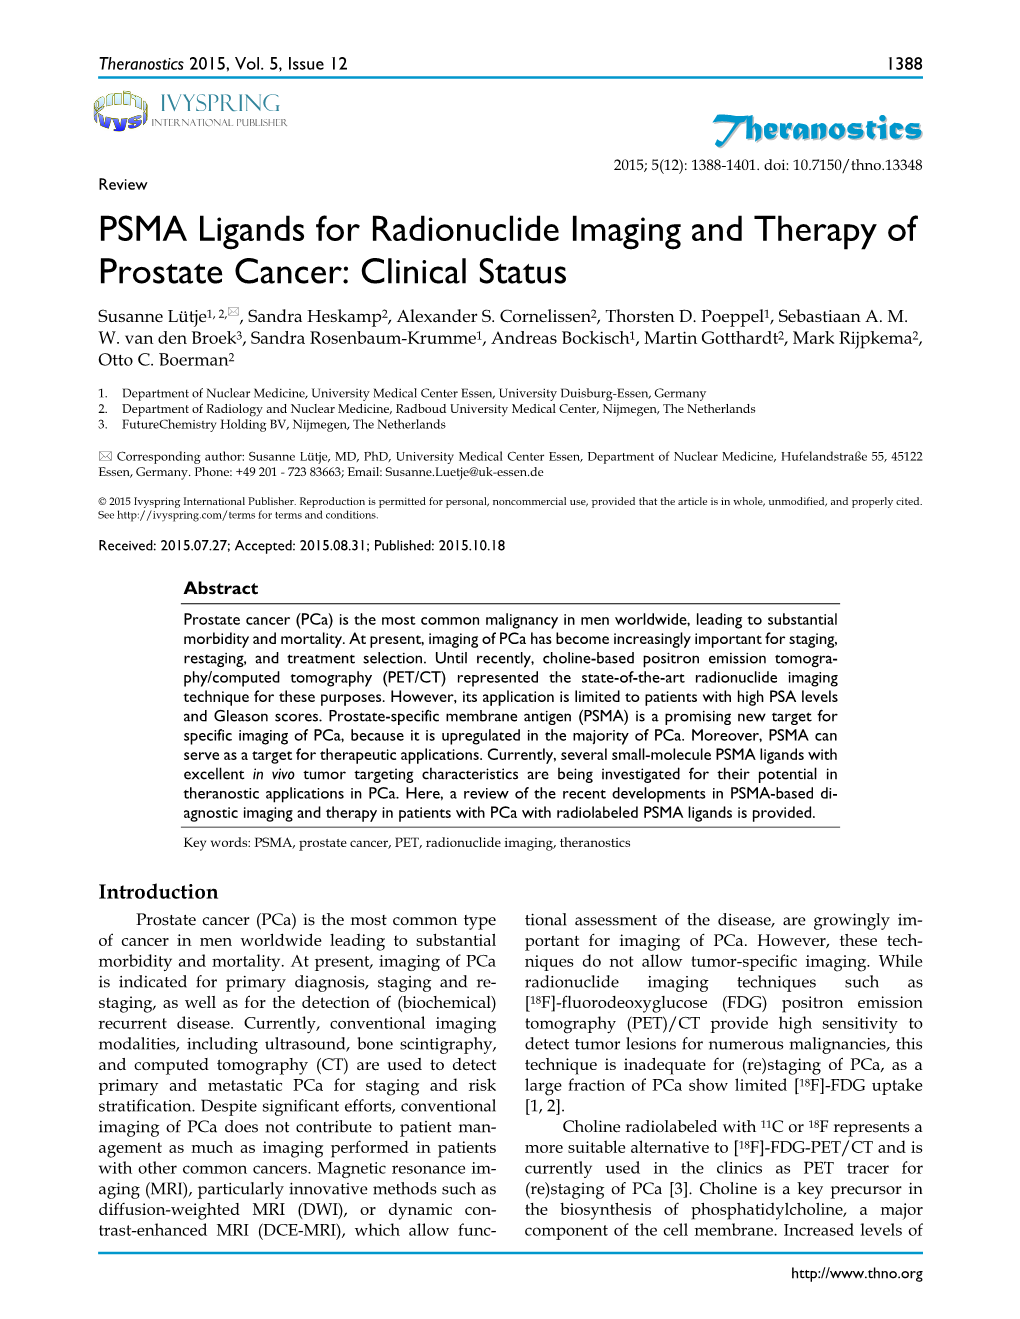 Theranostics PSMA Ligands for Radionuclide Imaging and Therapy